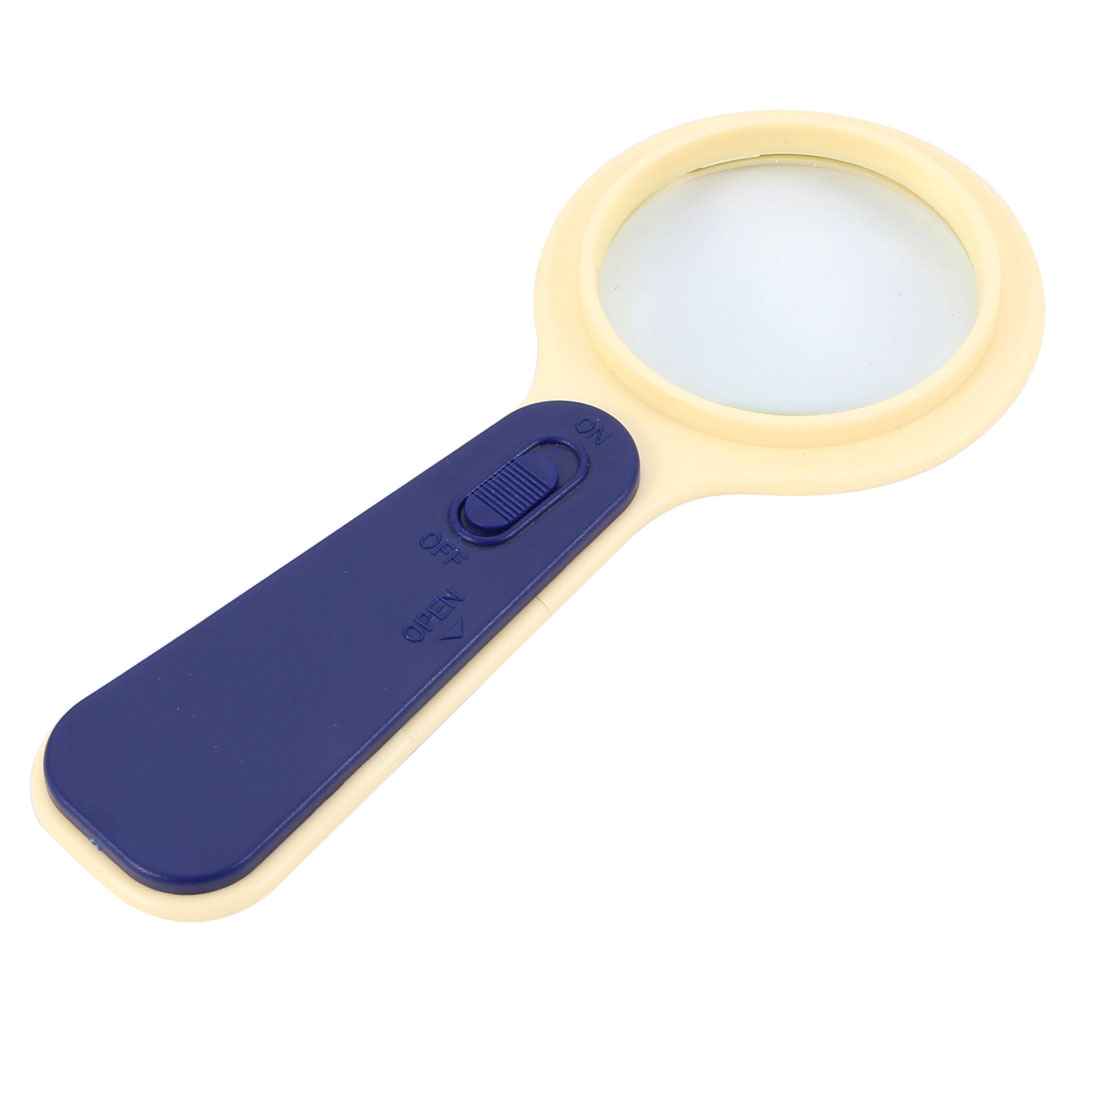 Magnifier 10X Illuminated Magnifier Handheld Magnifying Glass w Light 